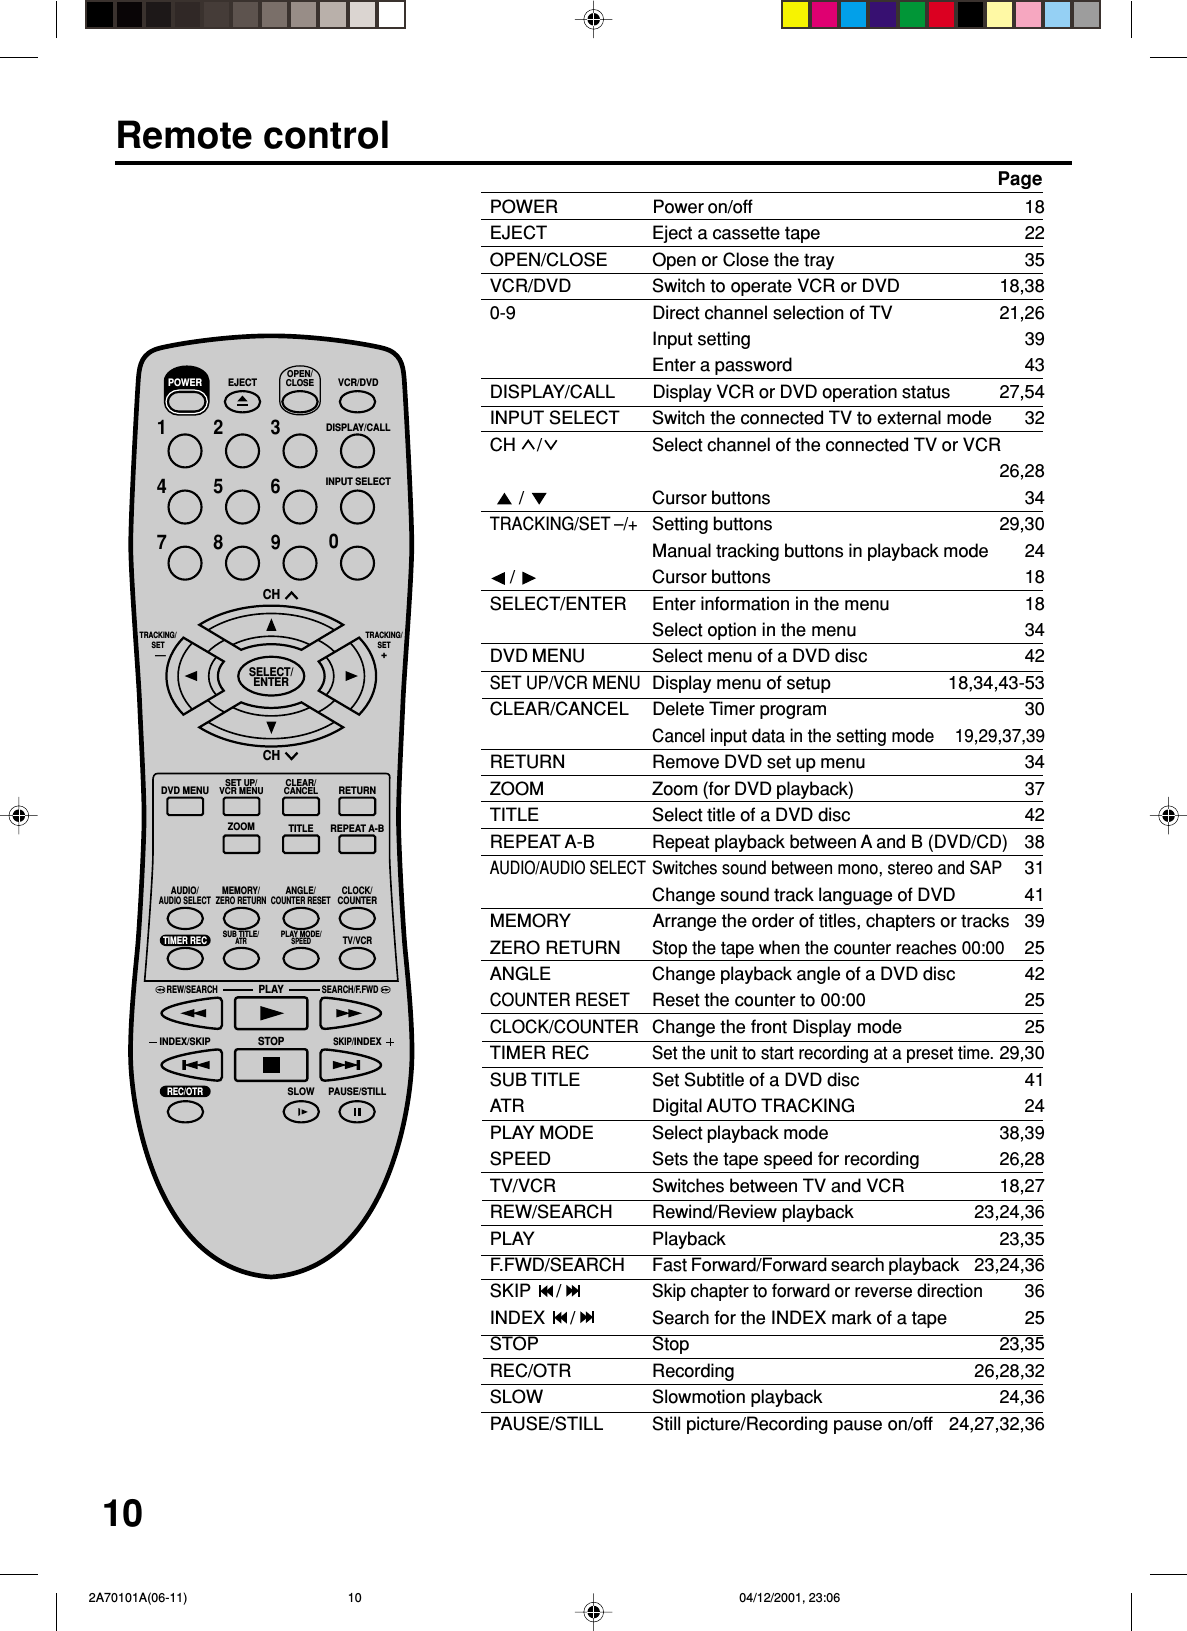 10POWER Power on/off 18EJECT Eject a cassette tape 22OPEN/CLOSE Open or Close the tray 35VCR/DVD Switch to operate VCR or DVD 18,380-9 Direct channel selection of TV 21,26Input setting 39Enter a password 43DISPLAY/CALL Display VCR or DVD operation status 27,54INPUT SELECT Switch the connected TV to external mode 32CH  /Select channel of the connected TV or VCR26,28  /  Cursor buttons 34TRACKING/SET –/+Setting buttons 29,30Manual tracking buttons in playback mode 24    / Cursor buttons 18SELECT/ENTER Enter information in the menu 18Select option in the menu 34DVD MENU Select menu of a DVD disc 42SET UP/VCR MENUDisplay menu of setup 18,34,43-53CLEAR/CANCEL Delete Timer program 30Cancel input data in the setting mode 19,29,37,39RETURN Remove DVD set up menu 34ZOOM Zoom (for DVD playback) 37TITLE Select title of a DVD disc 42REPEAT A-BRepeat playback between A and B (DVD/CD)38AUDIO/AUDIO SELECTSwitches sound between mono, stereo and SAP31Change sound track language of DVD 41MEMORY Arrange the order of titles, chapters or tracks 39ZERO RETURNStop the tape when the counter reaches 00:0025ANGLE Change playback angle of a DVD disc 42COUNTER RESETReset the counter to 00:00 25CLOCK/COUNTERChange the front Display mode 25TIMER RECSet the unit to start recording at a preset time.29,30SUB TITLE Set Subtitle of a DVD disc 41ATR Digital AUTO TRACKING 24PLAY MODE Select playback mode 38,39SPEED Sets the tape speed for recording 26,28TV/VCR Switches between TV and VCR 18,27REW/SEARCH Rewind/Review playback 23,24,36PLAY Playback 23,35F.FWD/SEARCHFast Forward/Forward search playback23,24,36SKIP  /Skip chapter to forward or reverse direction36INDEX  /Search for the INDEX mark of a tape 25STOP Stop 23,35REC/OTR Recording 26,28,32SLOW Slowmotion playback 24,36PAUSE/STILL Still picture/Recording pause on/off 24,27,32,36EJECTOPEN/CLOSECHCHDVD MENU RETURNSET UP/VCR MENU CLEAR/CANCELANGLE/COUNTER RESETCLOCK/COUNTERPLAY MODE/SPEEDAUDIO/AUDIO SELECTTV/VCRPLAYINDEX/SKIPSKIP/INDEXSLOW PAUSE/STILLSTOPZOOMVCR/DVDDISPLAY/CALLTRACKING/SET—TRACKING/SET+TITLE REPEAT A-BREW/SEARCH SEARCH/F.FWDPOWERTIMER RECREC/OTRSUB TITLE/ATRMEMORY/ZERO RETURN123INPUT SELECT4560789SELECT/ENTERRemote controlPage 2A70101A(06-11) 04/12/2001, 23:0610